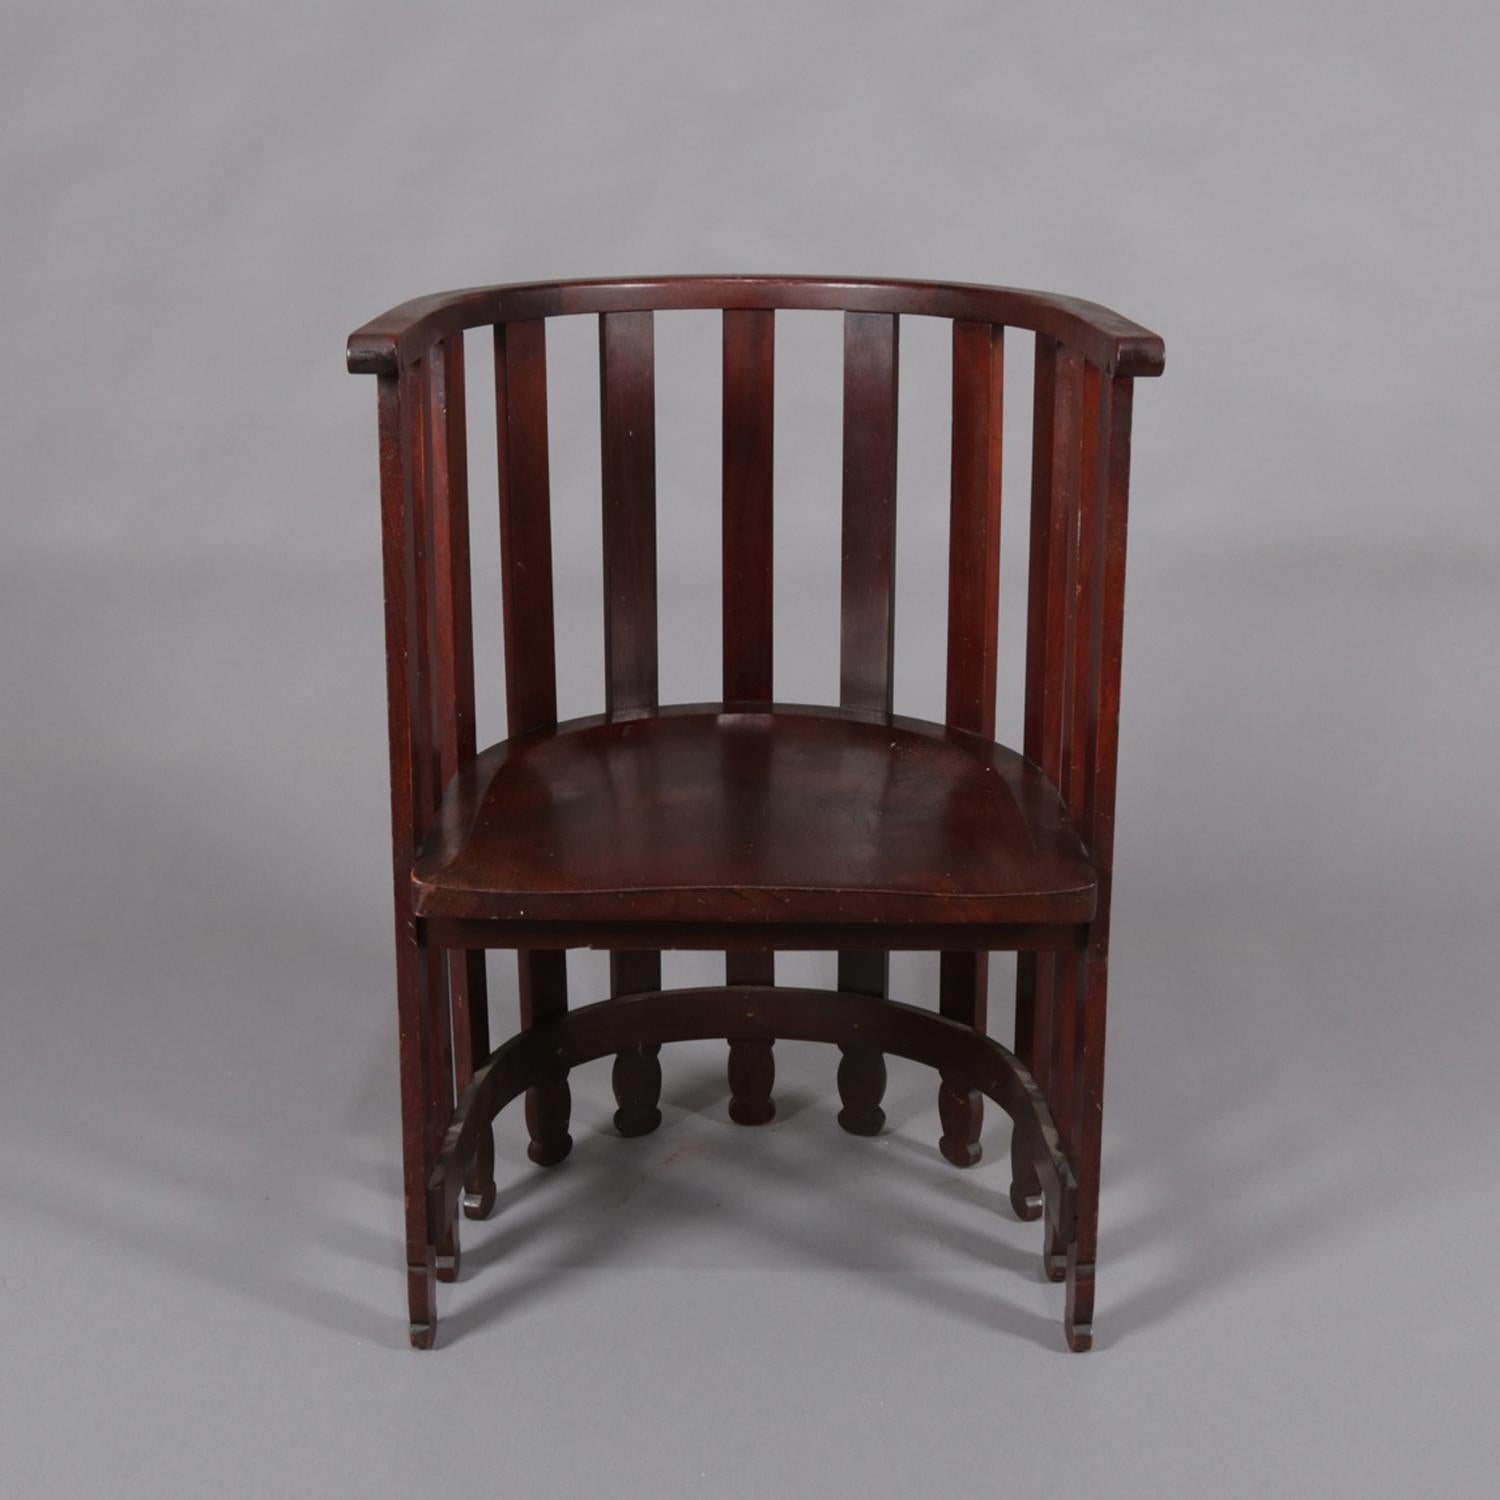 Arts & Crafts Frank Lloyd Wright Prairie school armchair features mahogany construction with barrel back form and having spindles with shaped feet, 20th century.

Measures: 31.25